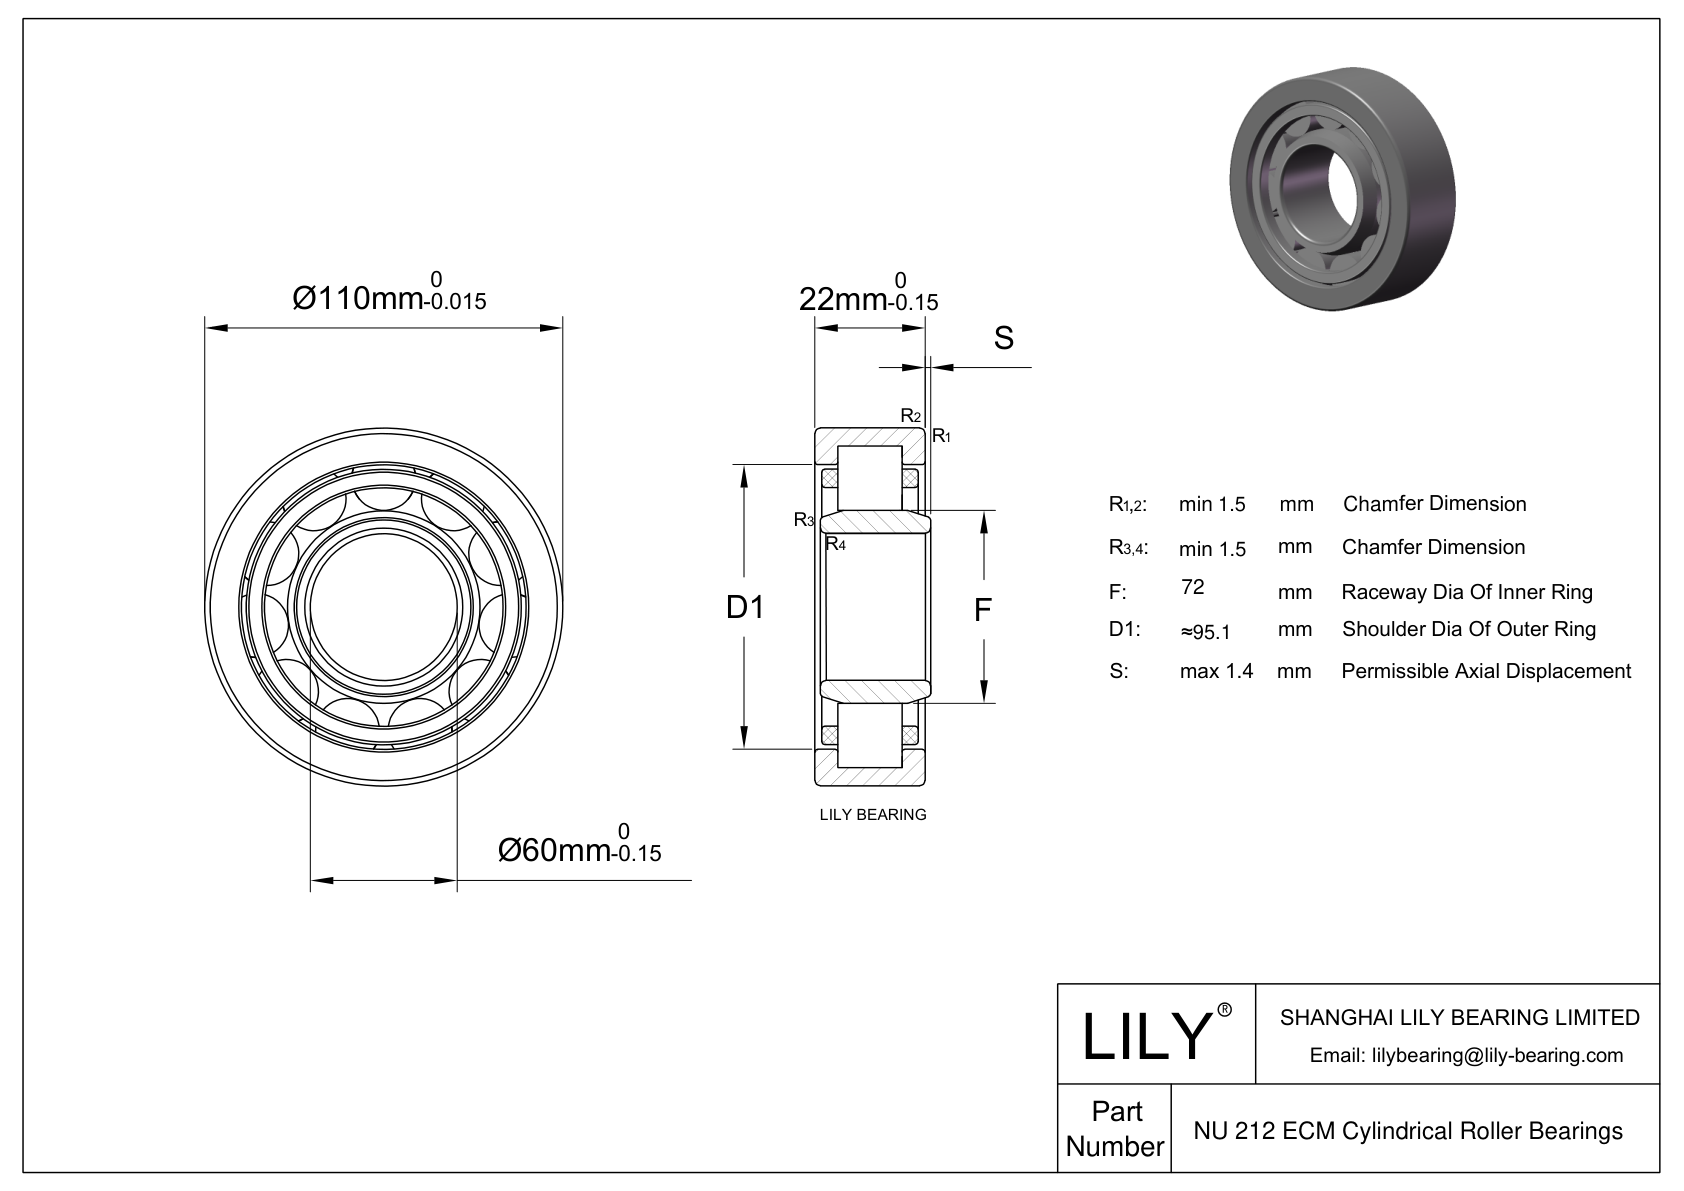 NU 212 ECM/C3VL0241 Ceramic Coated Cylindrical Roller Bearings cad drawing